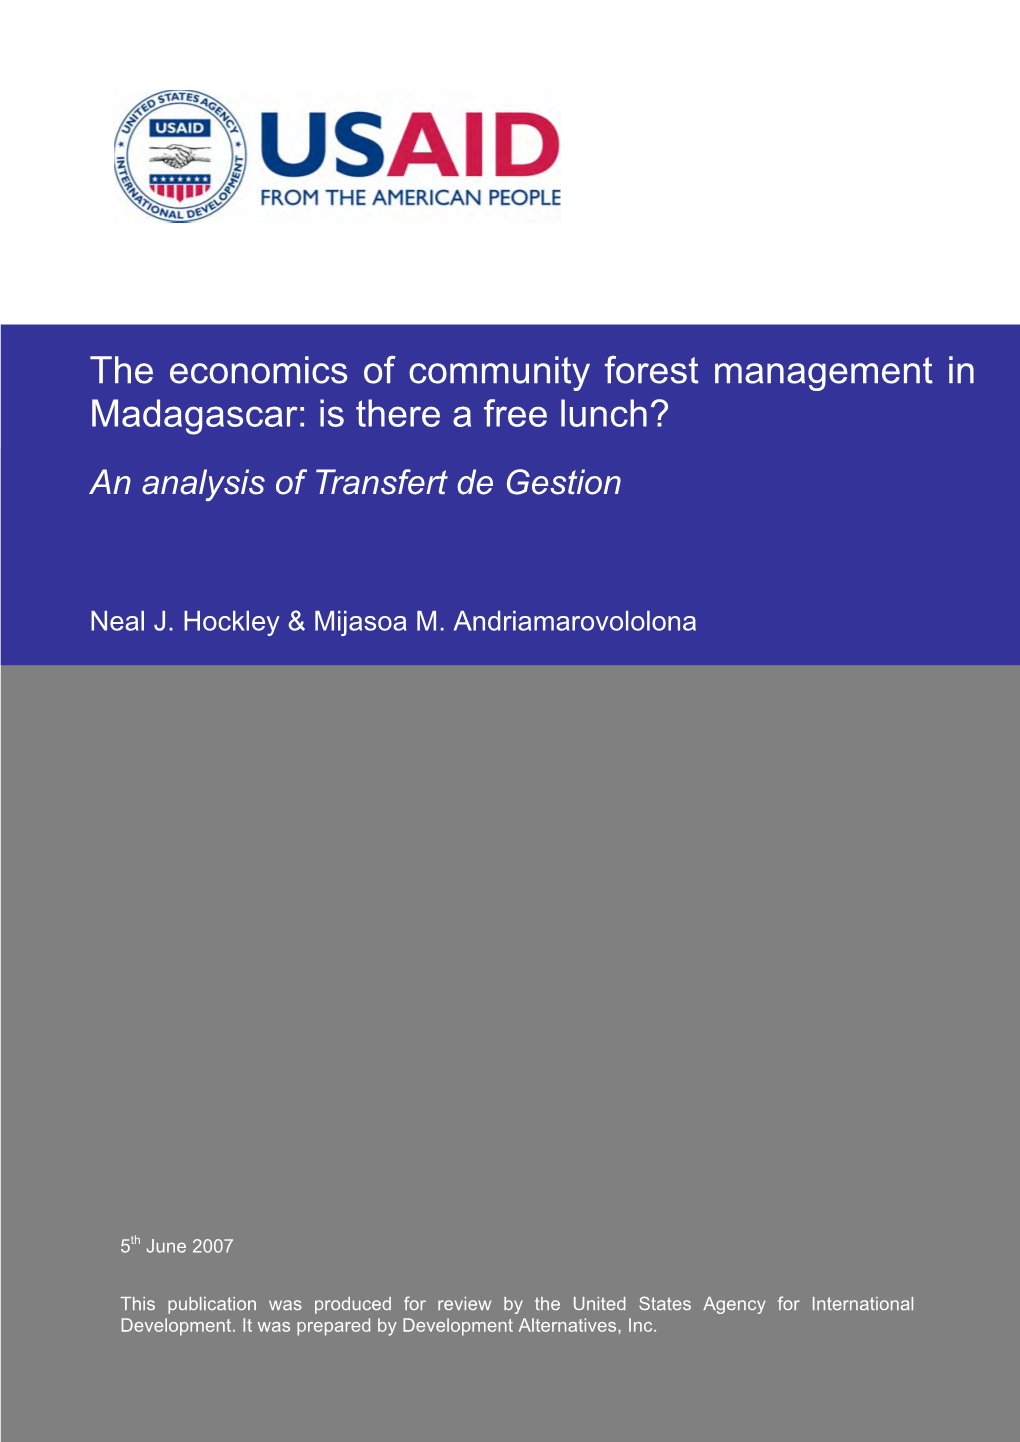 The Economics of Community Forest Management in Madagascar: Is There a Free Lunch? an Analysis of Transfert De Gestion